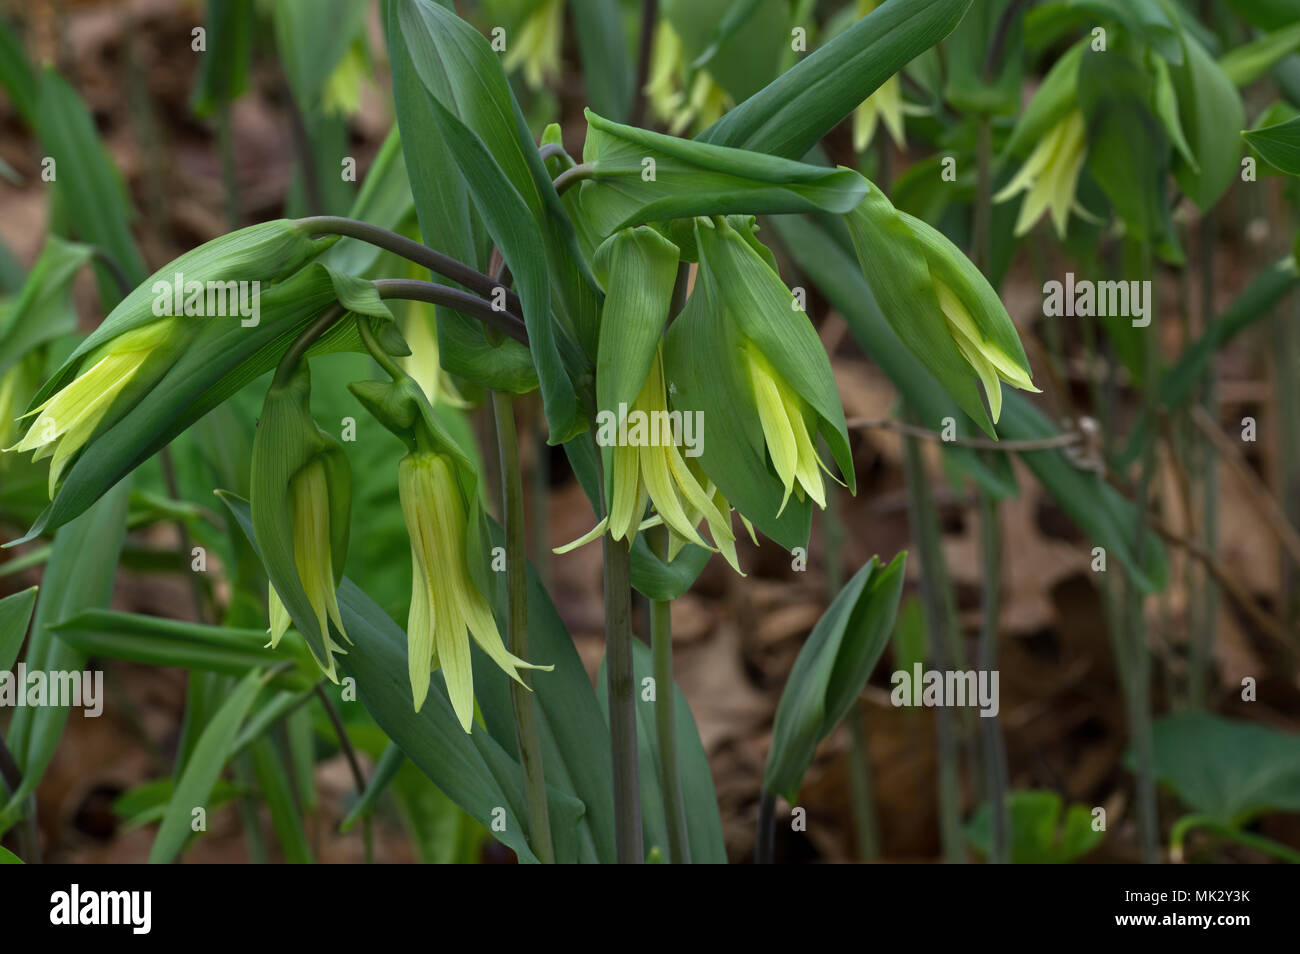 Bellwort in natural setting. Stock Photo